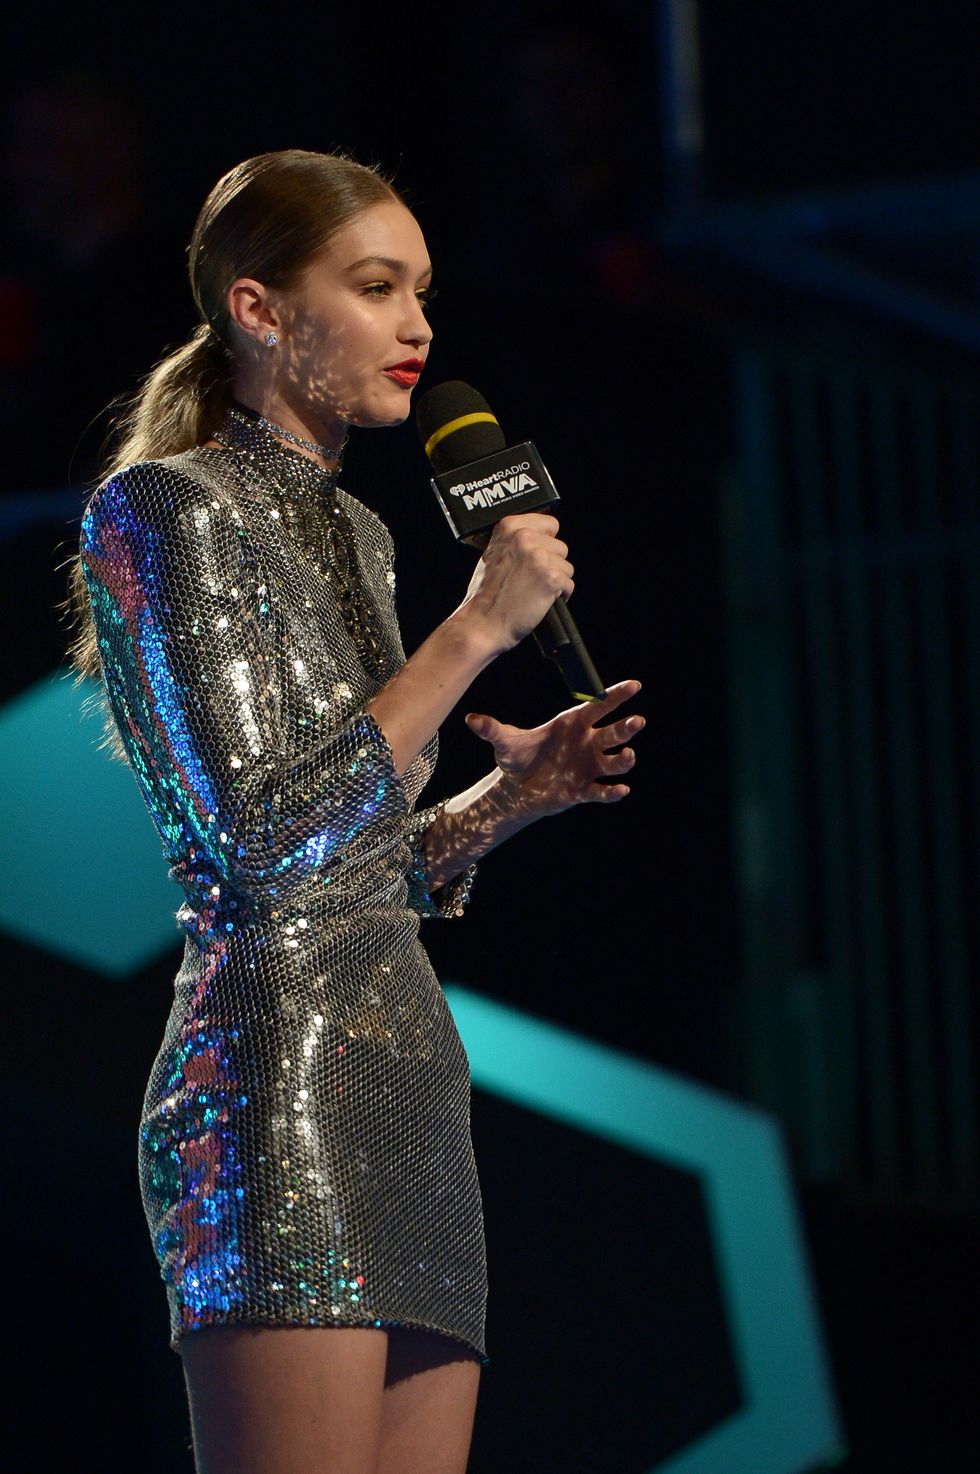 Gigi Hadid presenting at the iHeartRadio Much Music Awards